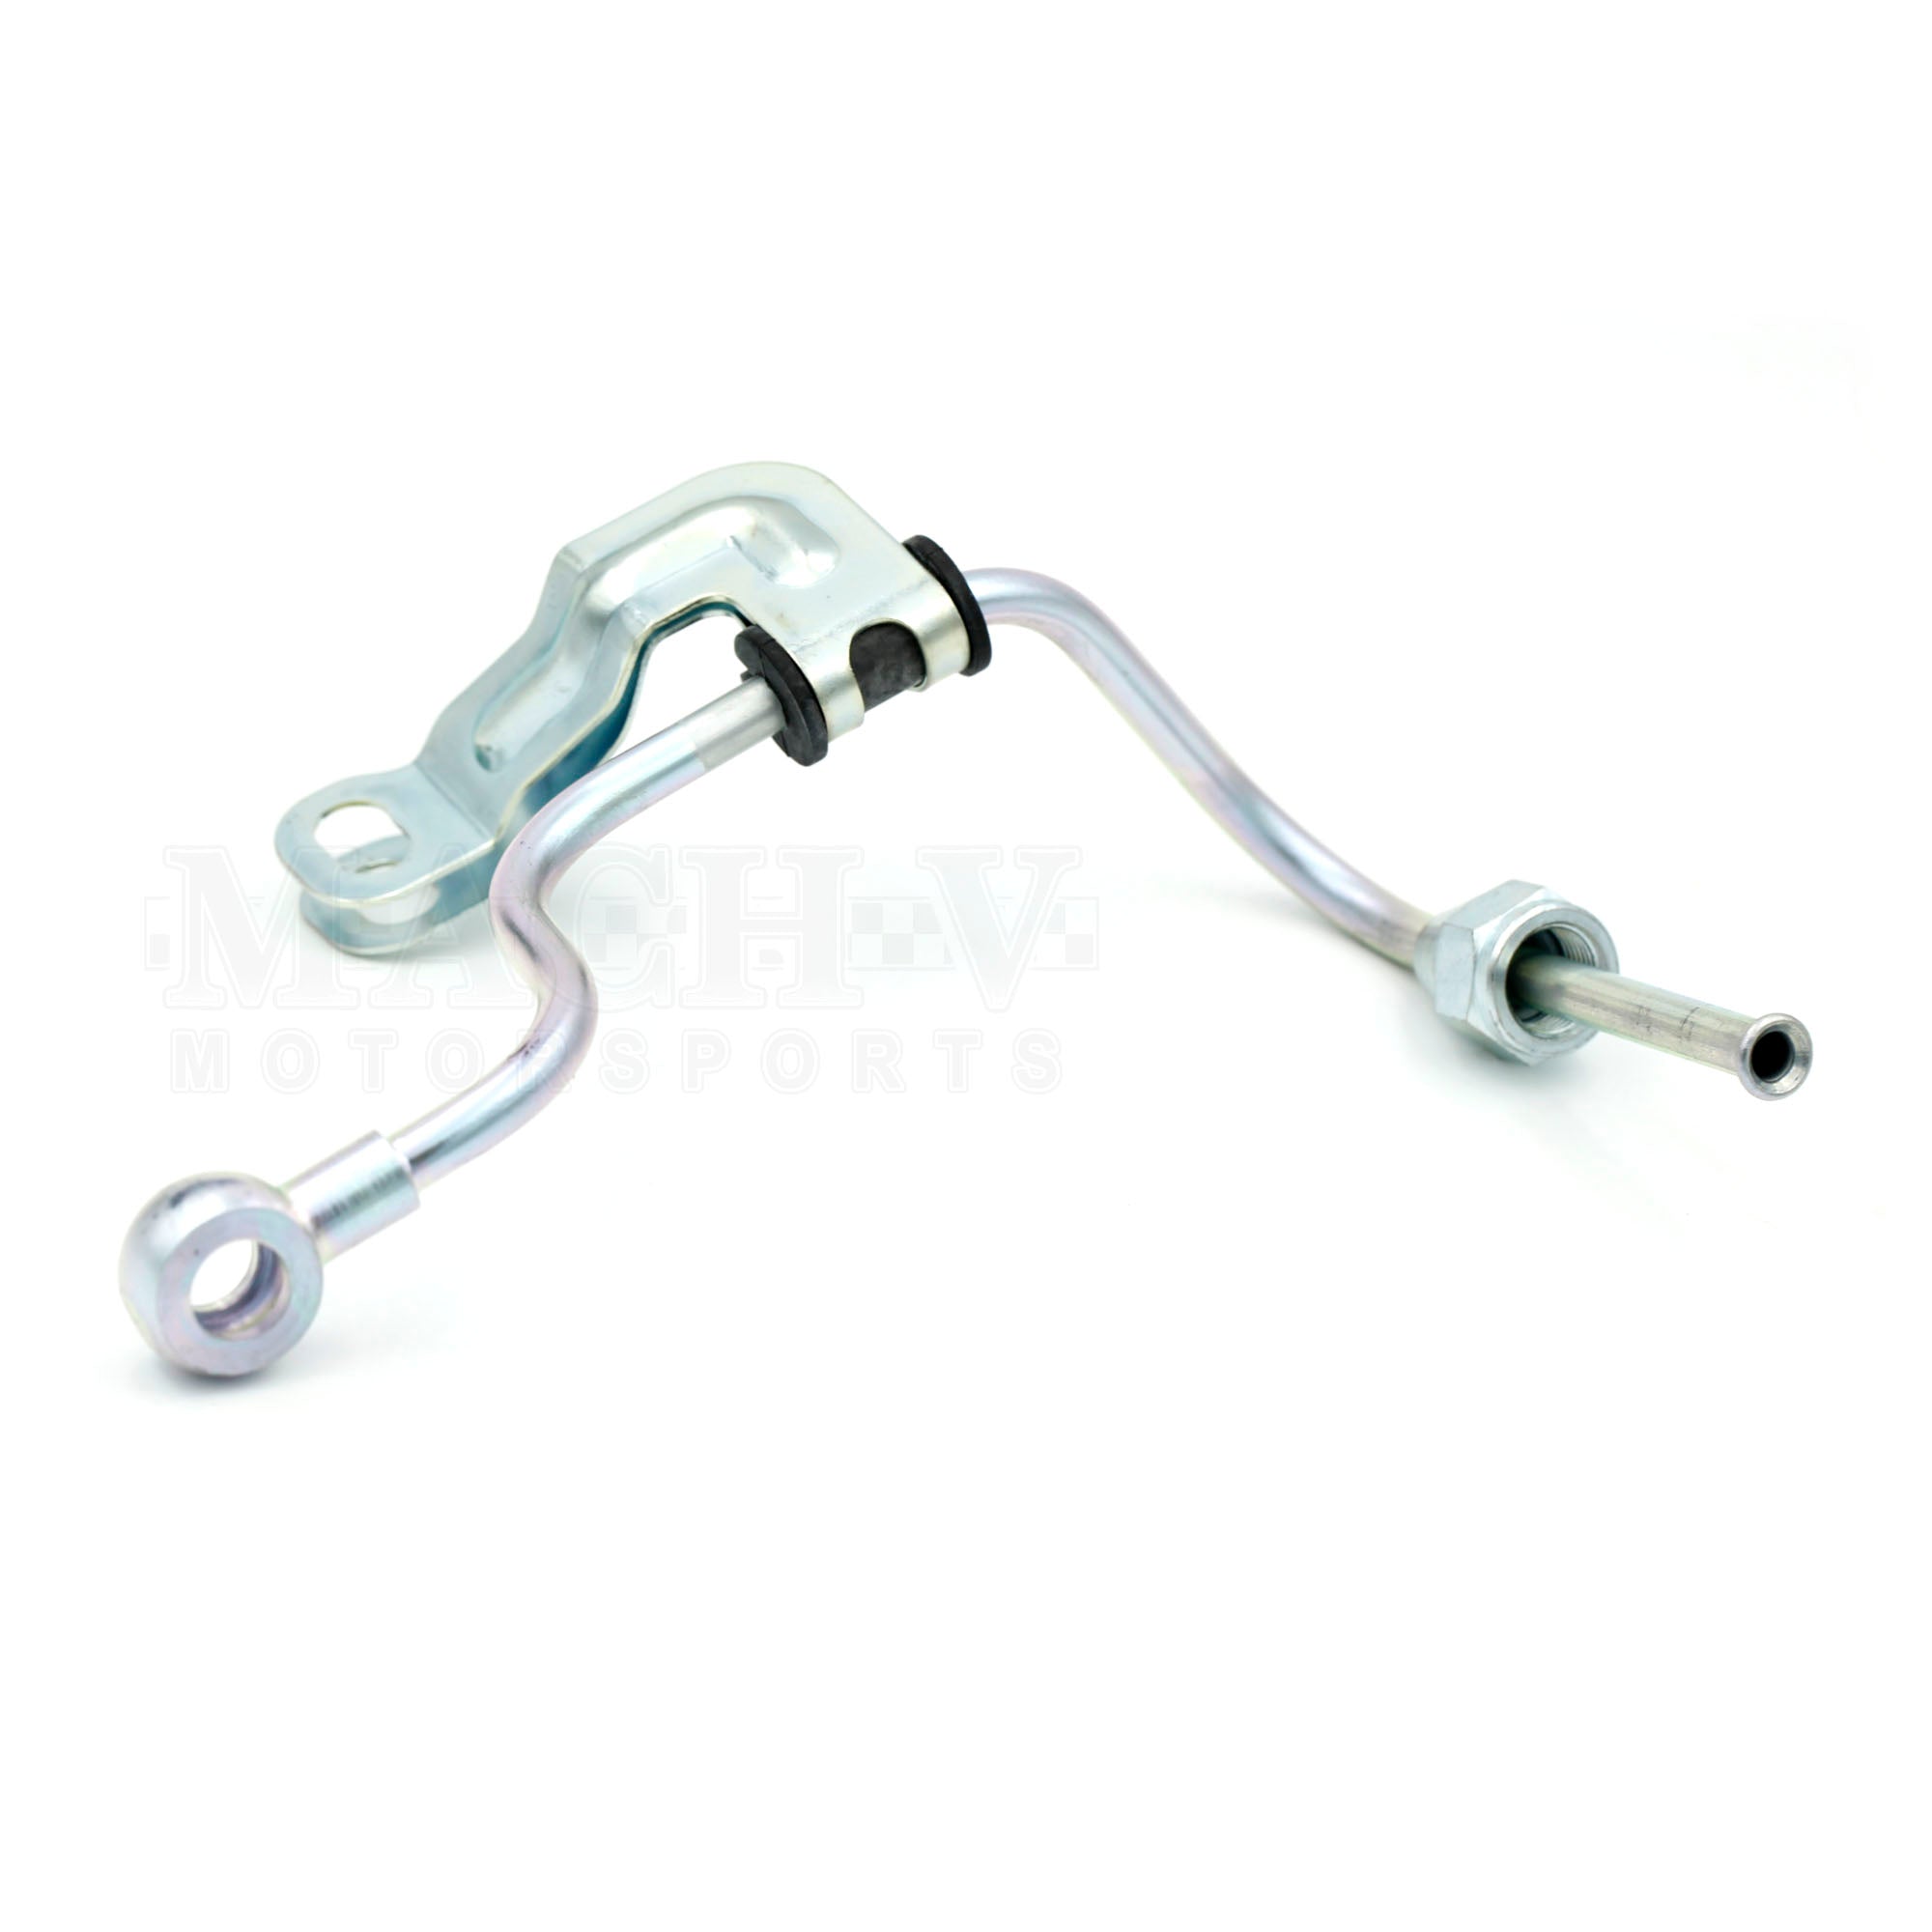 Turbo oil feed line 2005-2009 Legacy GT